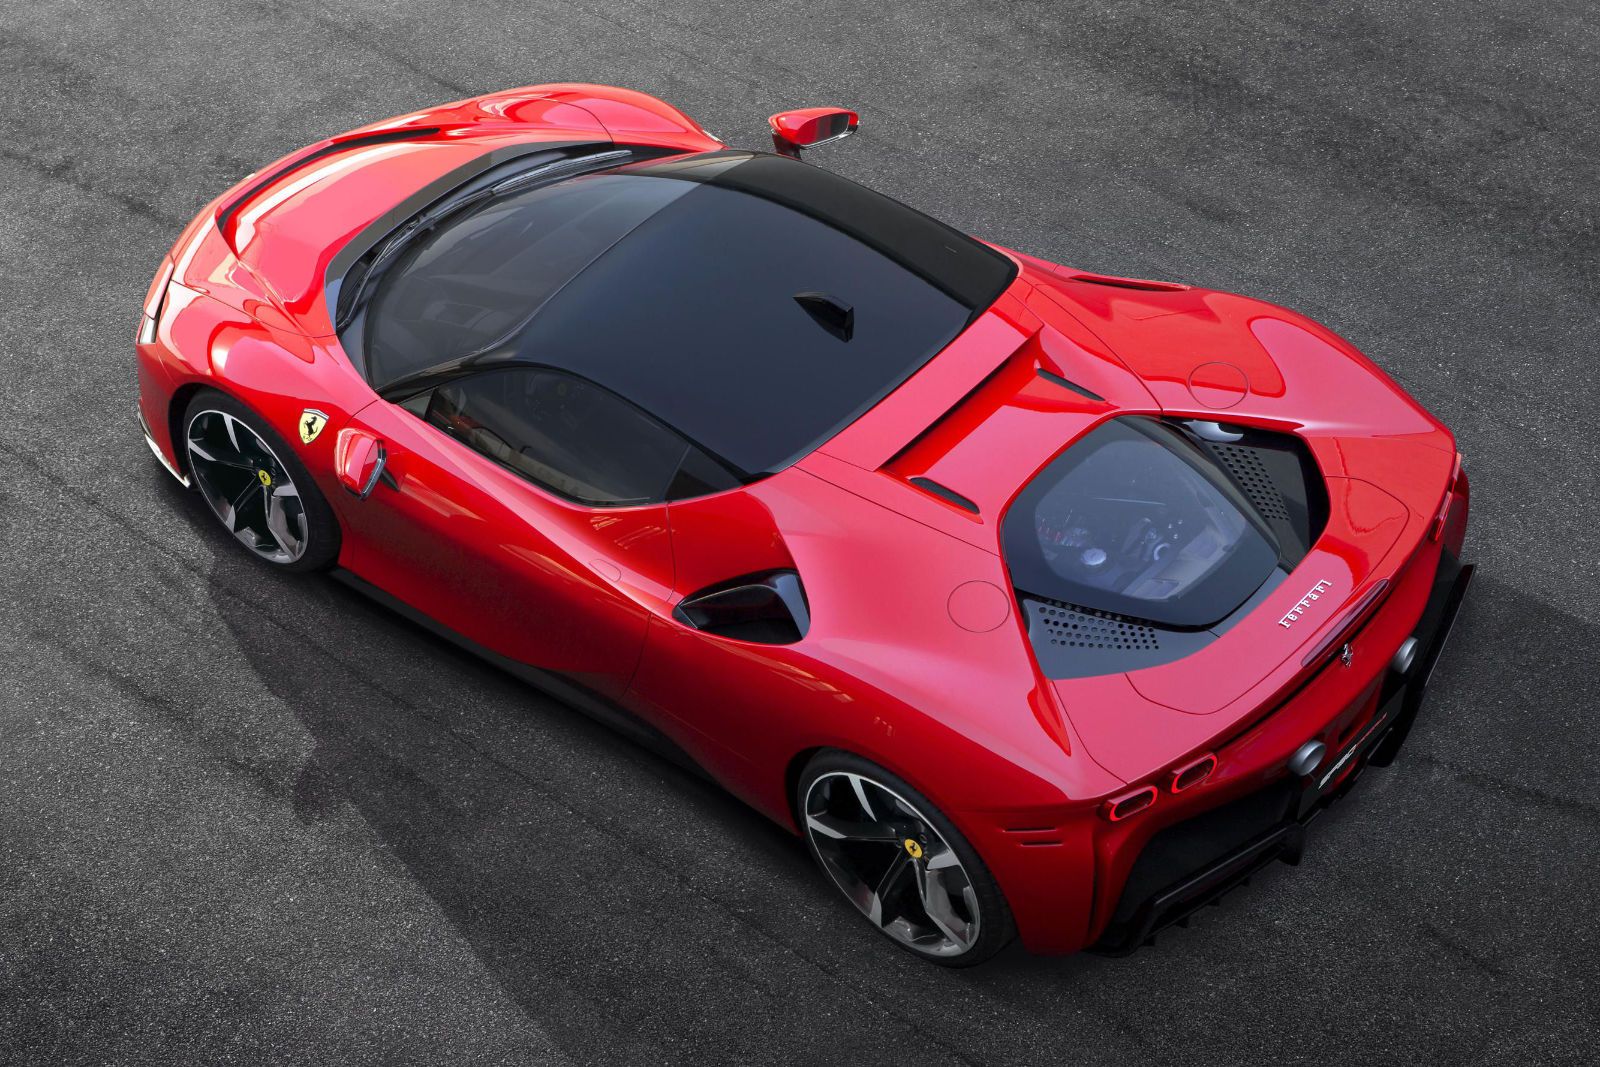 Ferrari Has Launched Its First Plug-in Hybrid The Blazing Fast Sf90 Stradale image 2